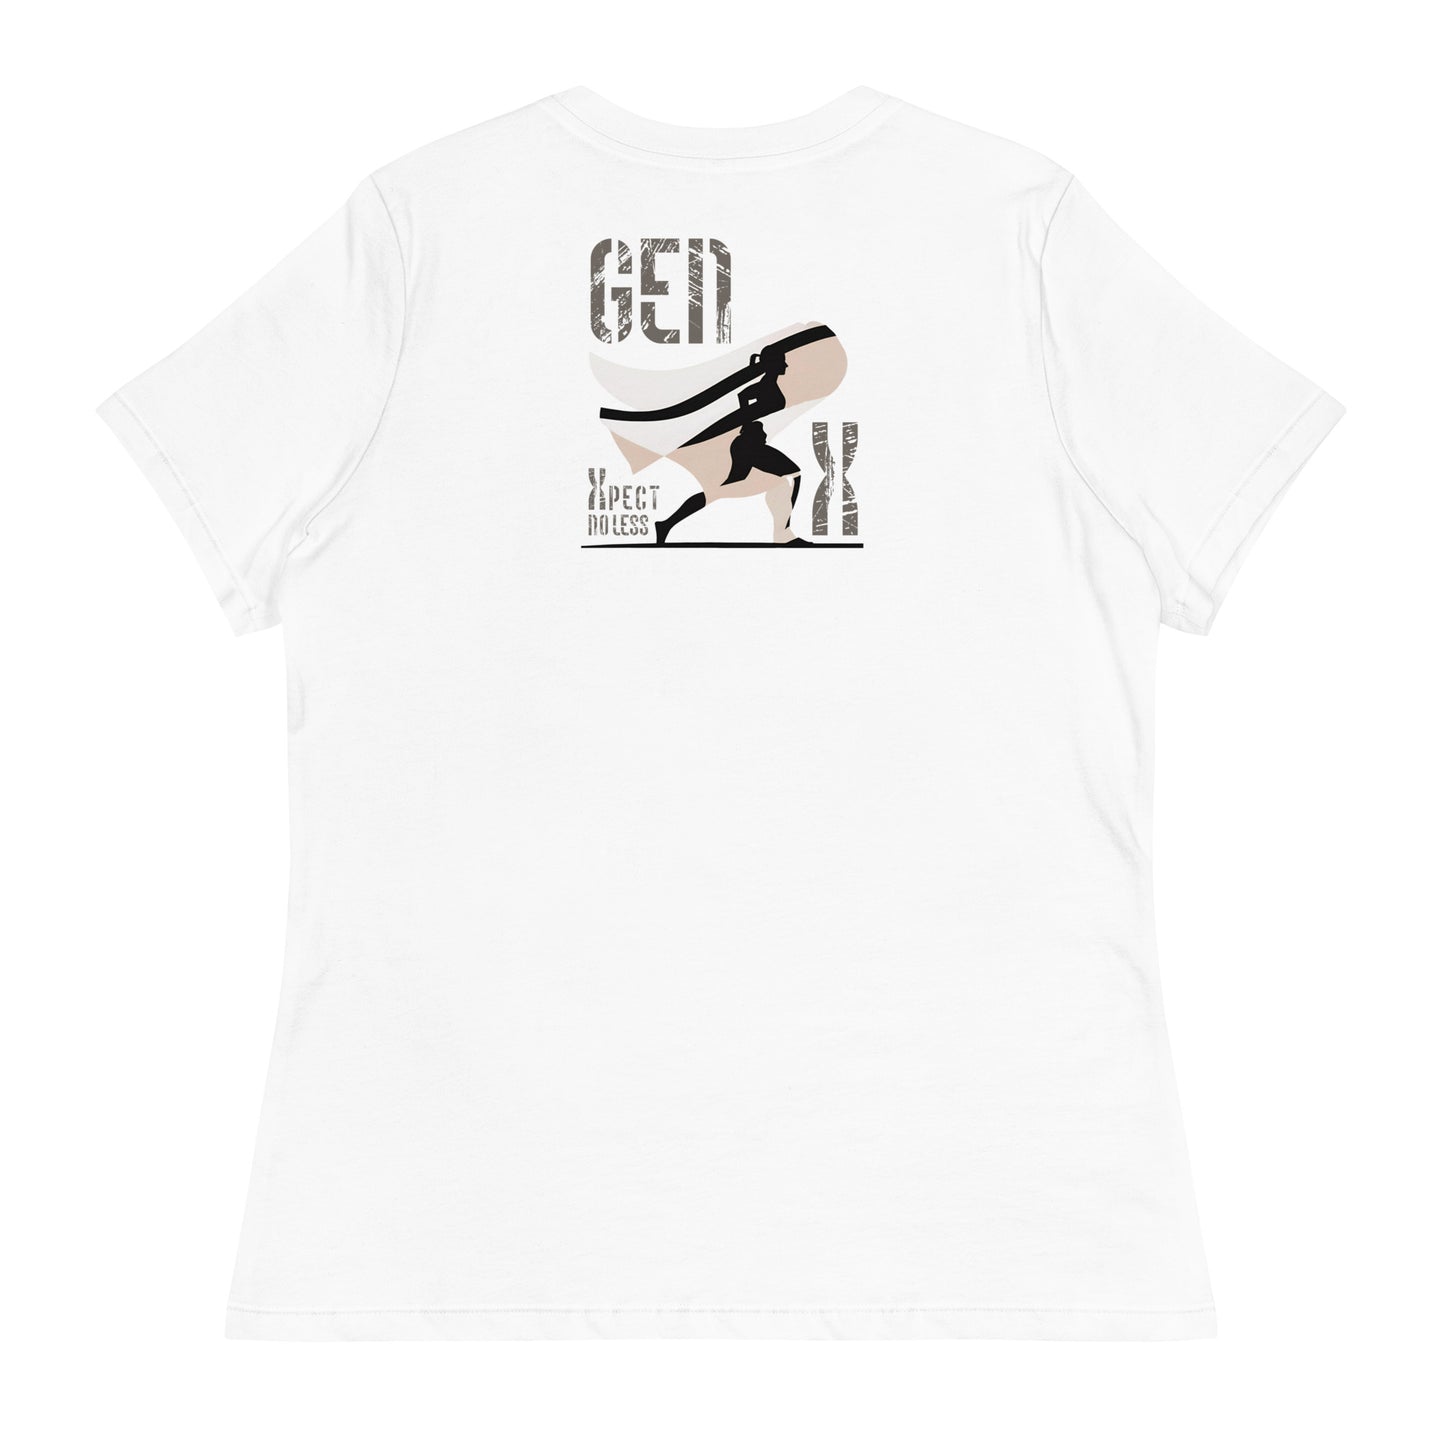 Xpect No Less: Women's GenX Graphic Relaxed T-Shirt